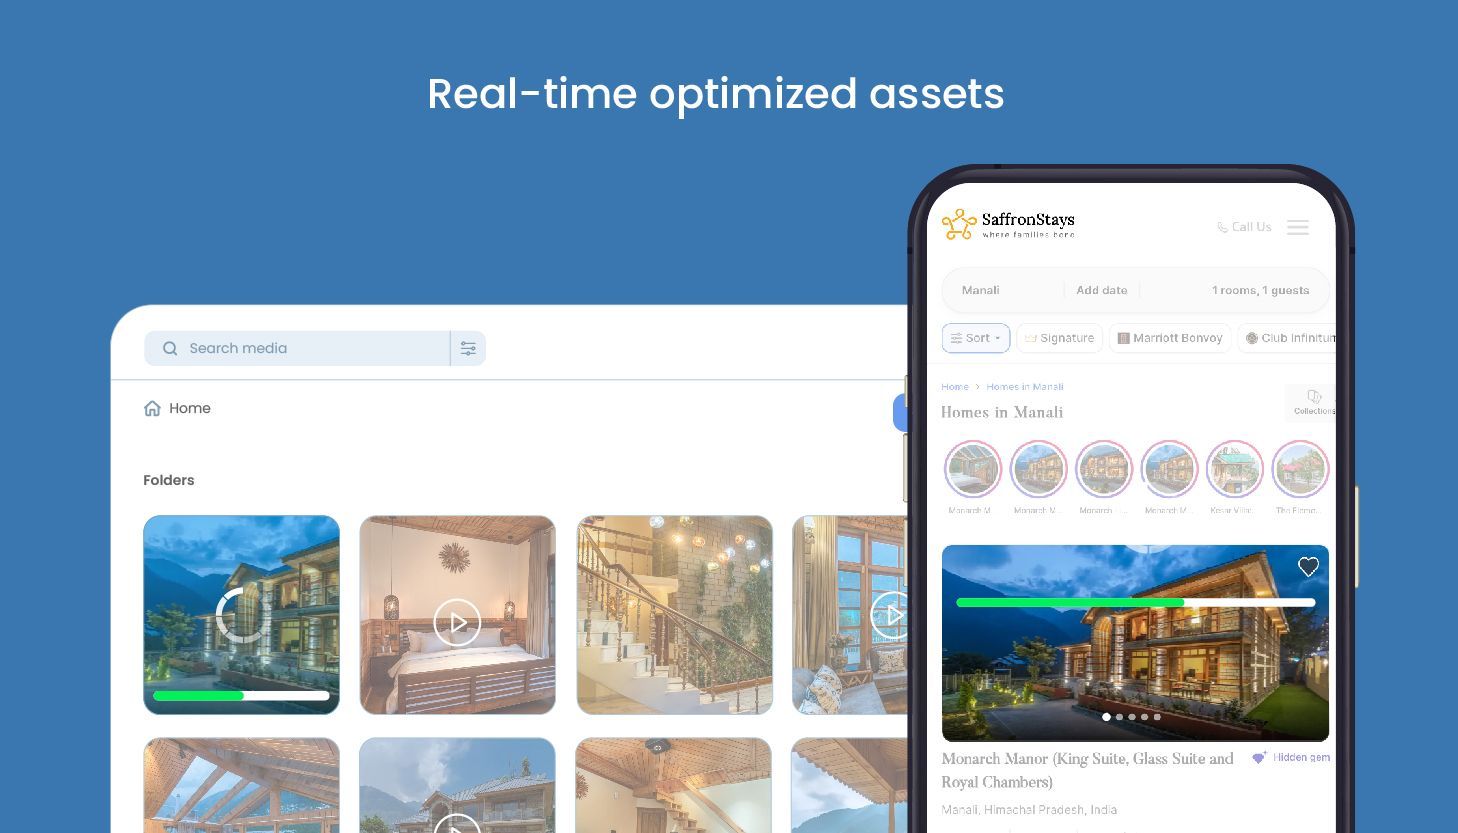 Real-time optimized assets by ImageKit